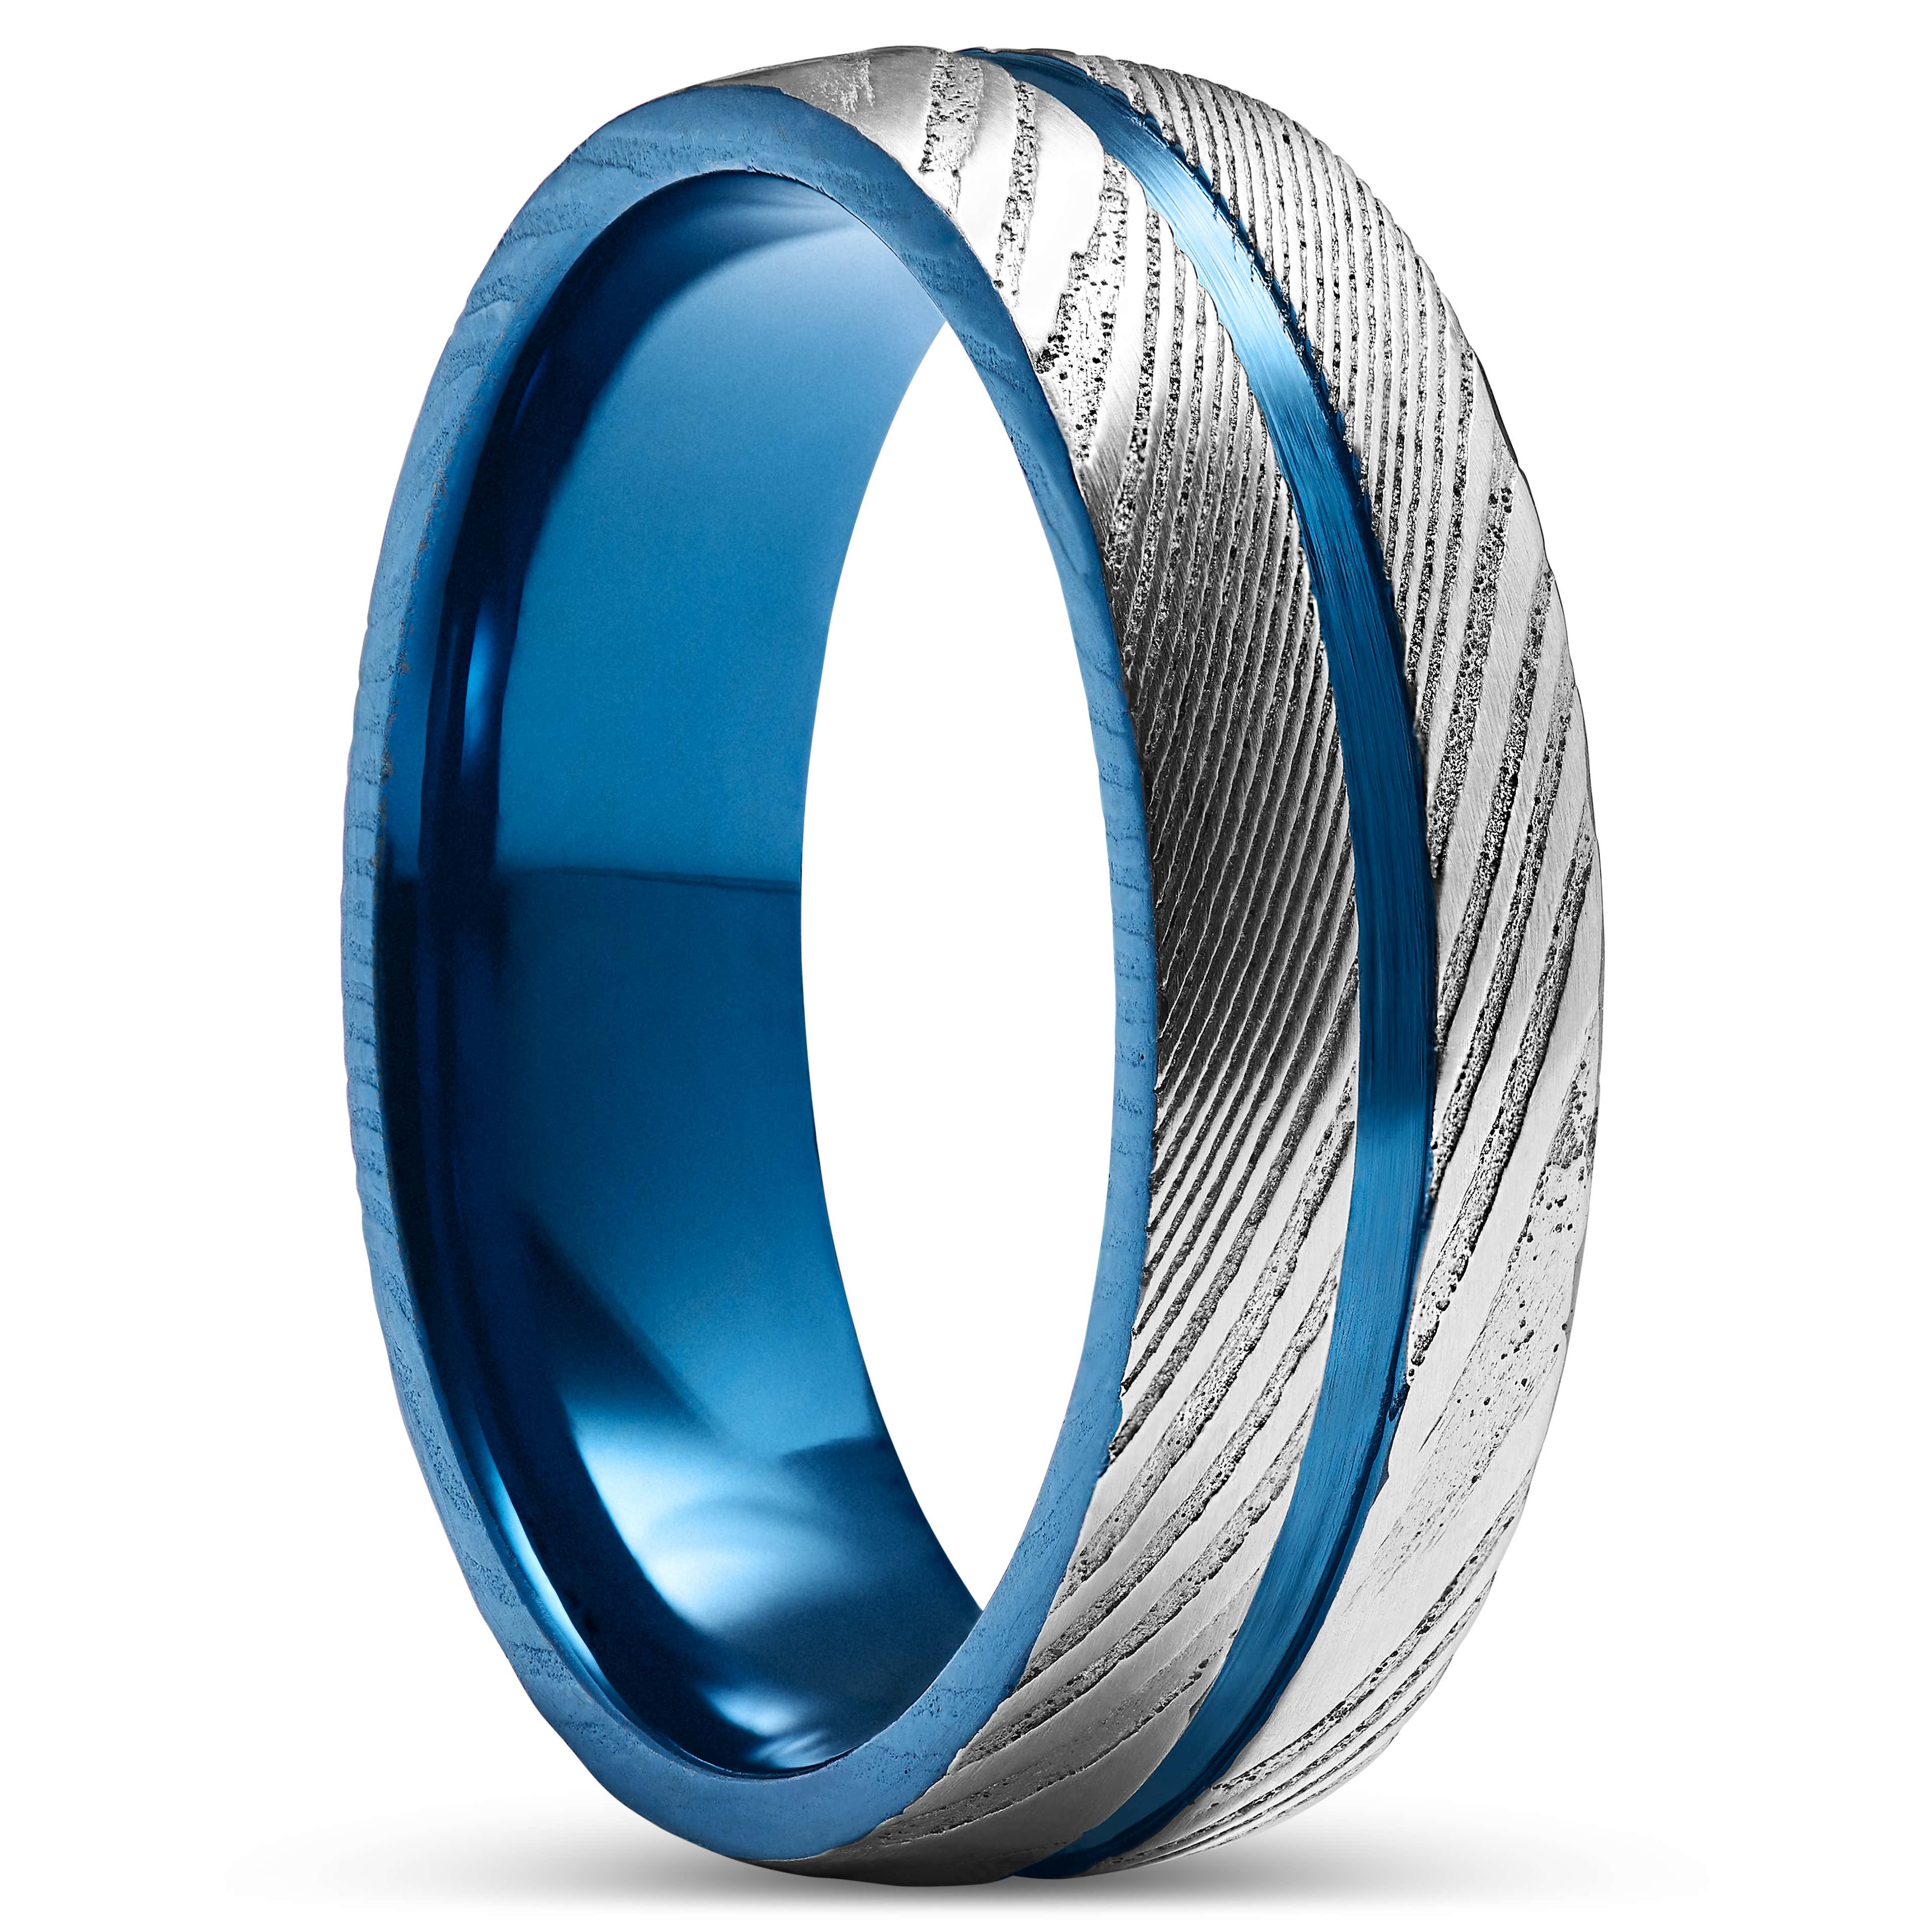 Fortis | 7 mm Grooved Silver-Tone Damascus Steel and Blue Titanium Ring